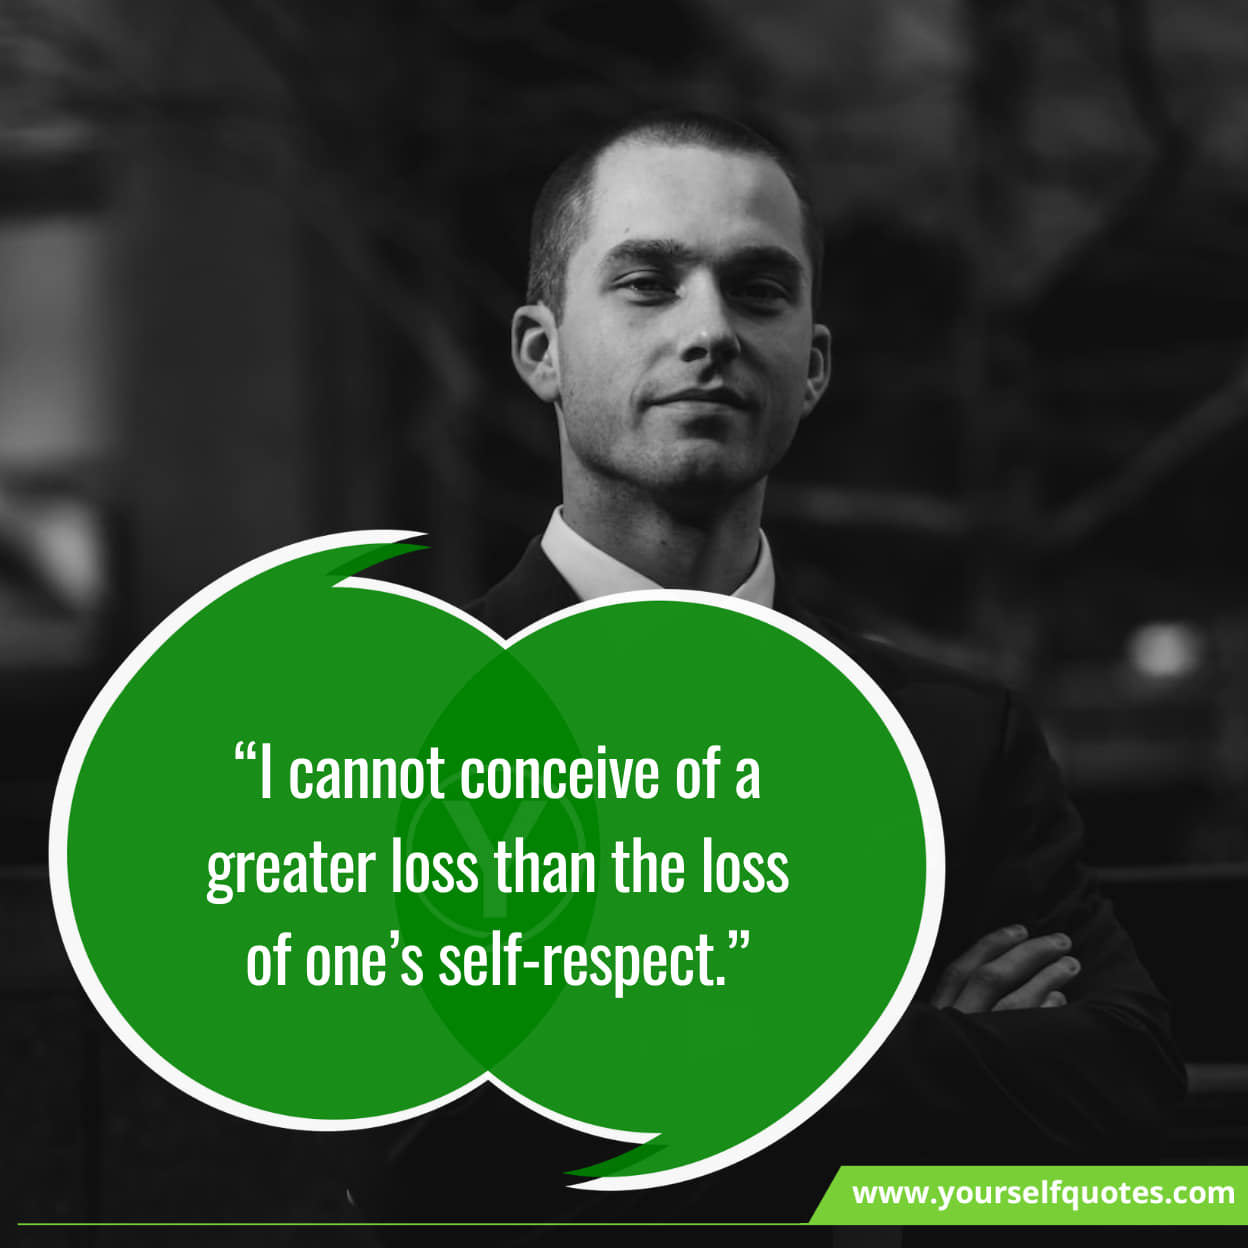 Inspiring Quotes On Self-Respect